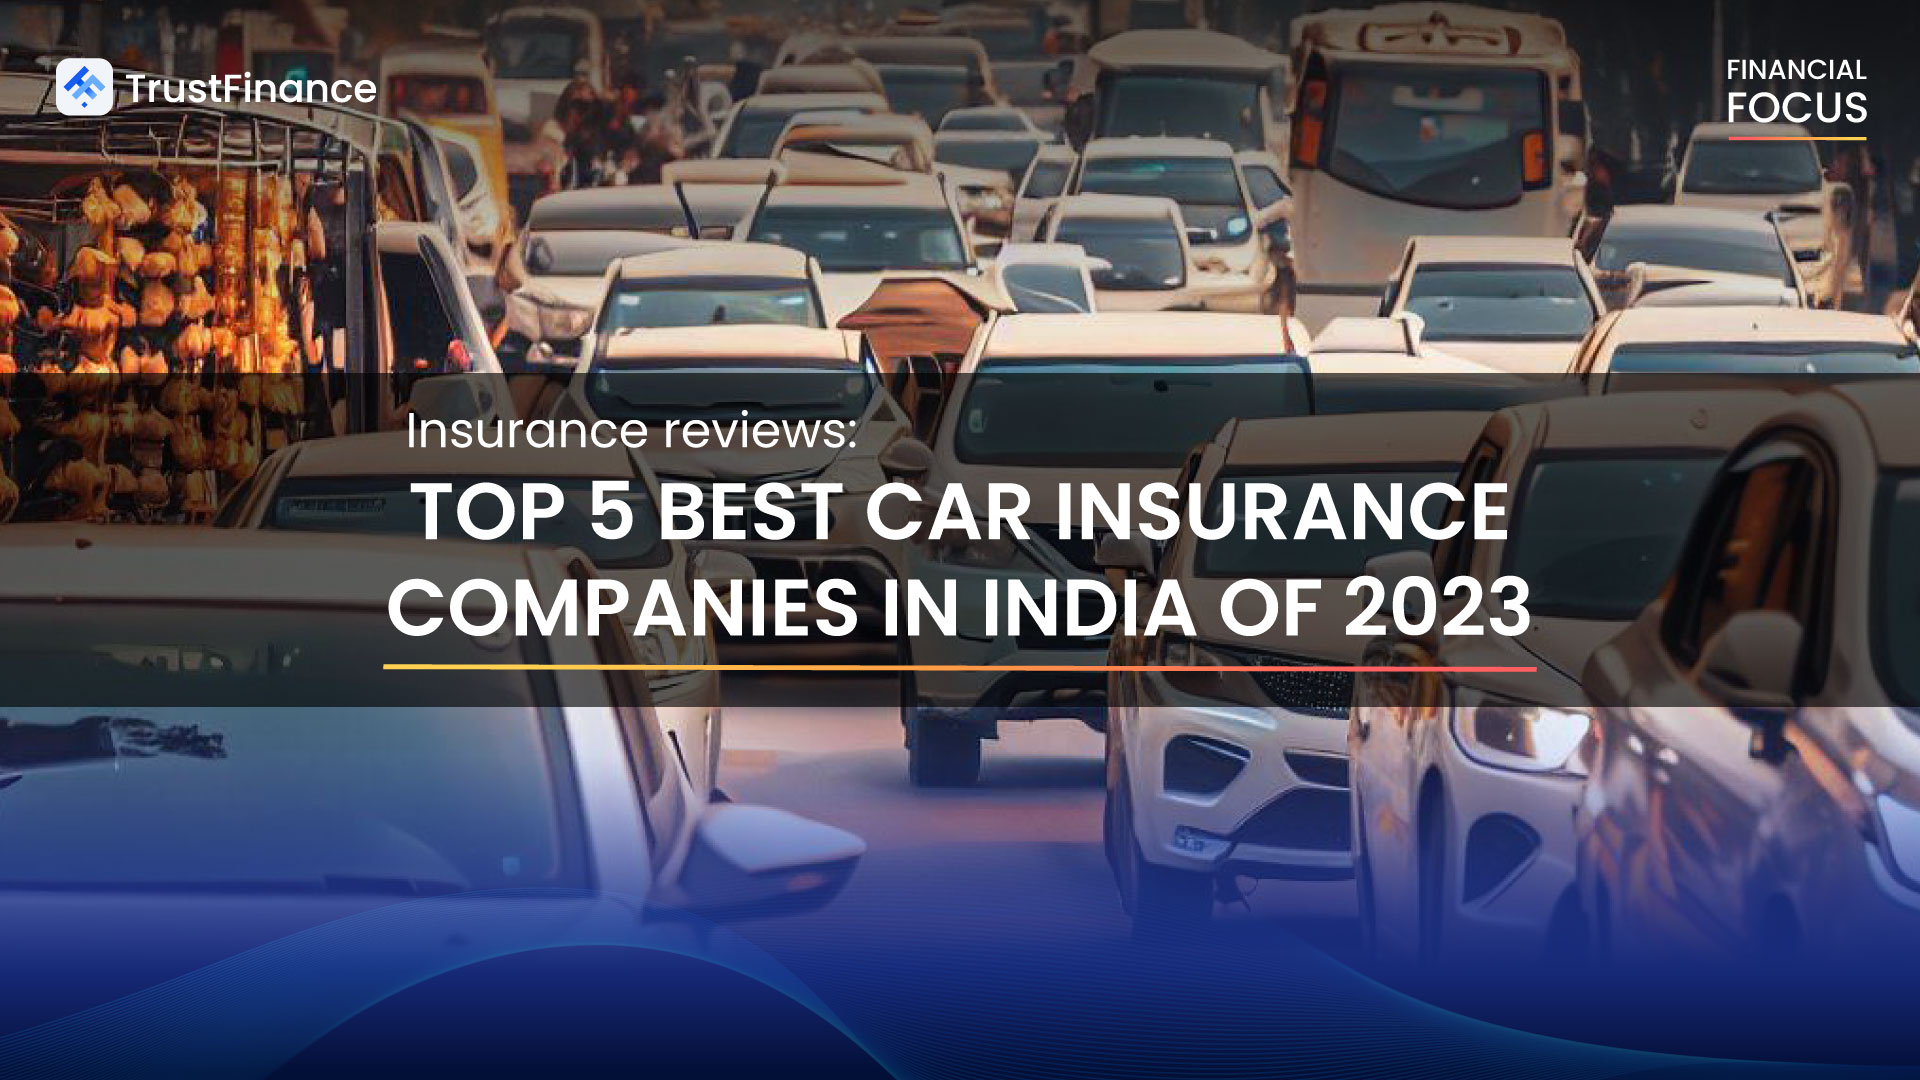 Insurance review: Top 5 Best Car Insurance Companies in India of 2023